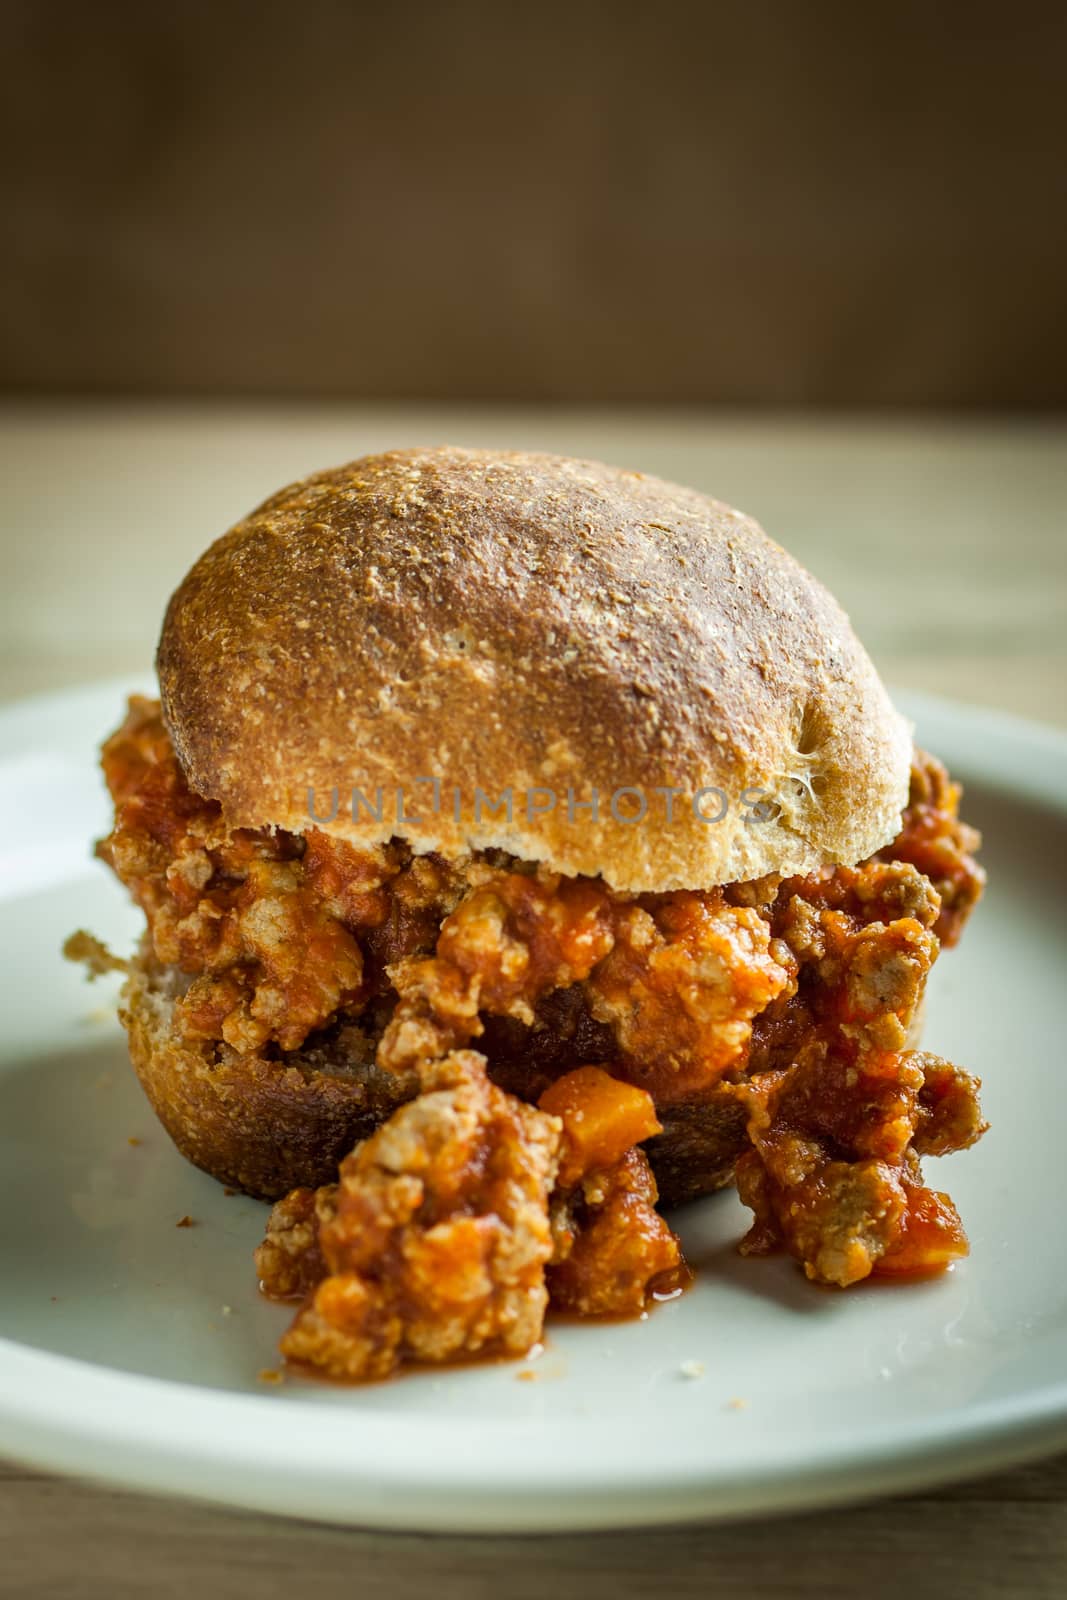 A rustic sloppy joe made with fresh whole wheat rolls and fresh ingredients.